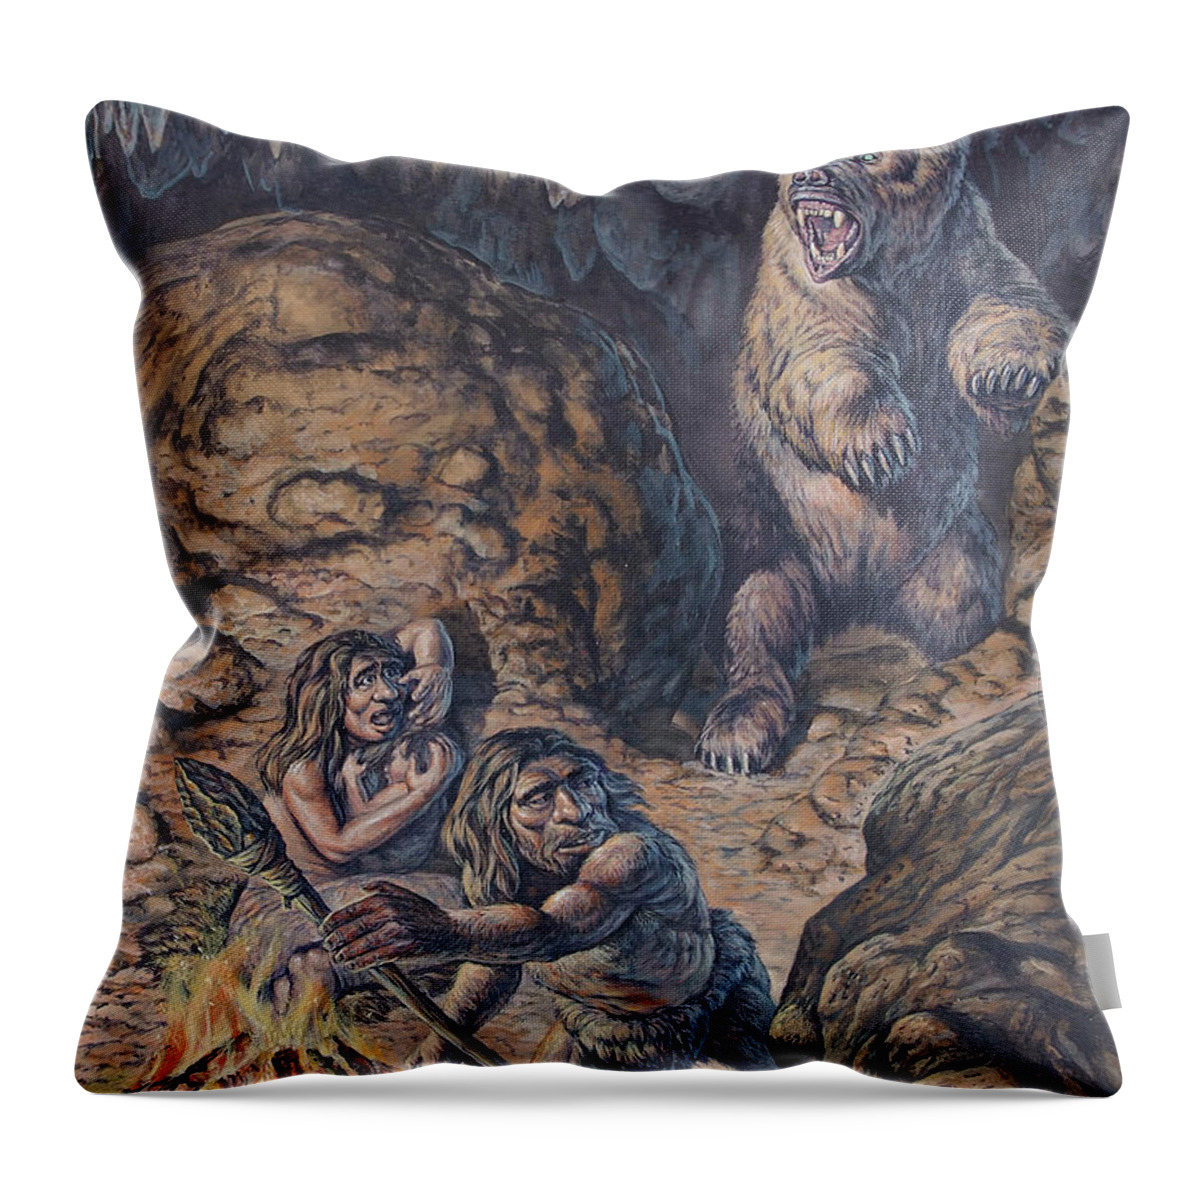 Vertical Throw Pillow featuring the digital art Neanderthal Humans Confronted By A Cave by Mark Hallett